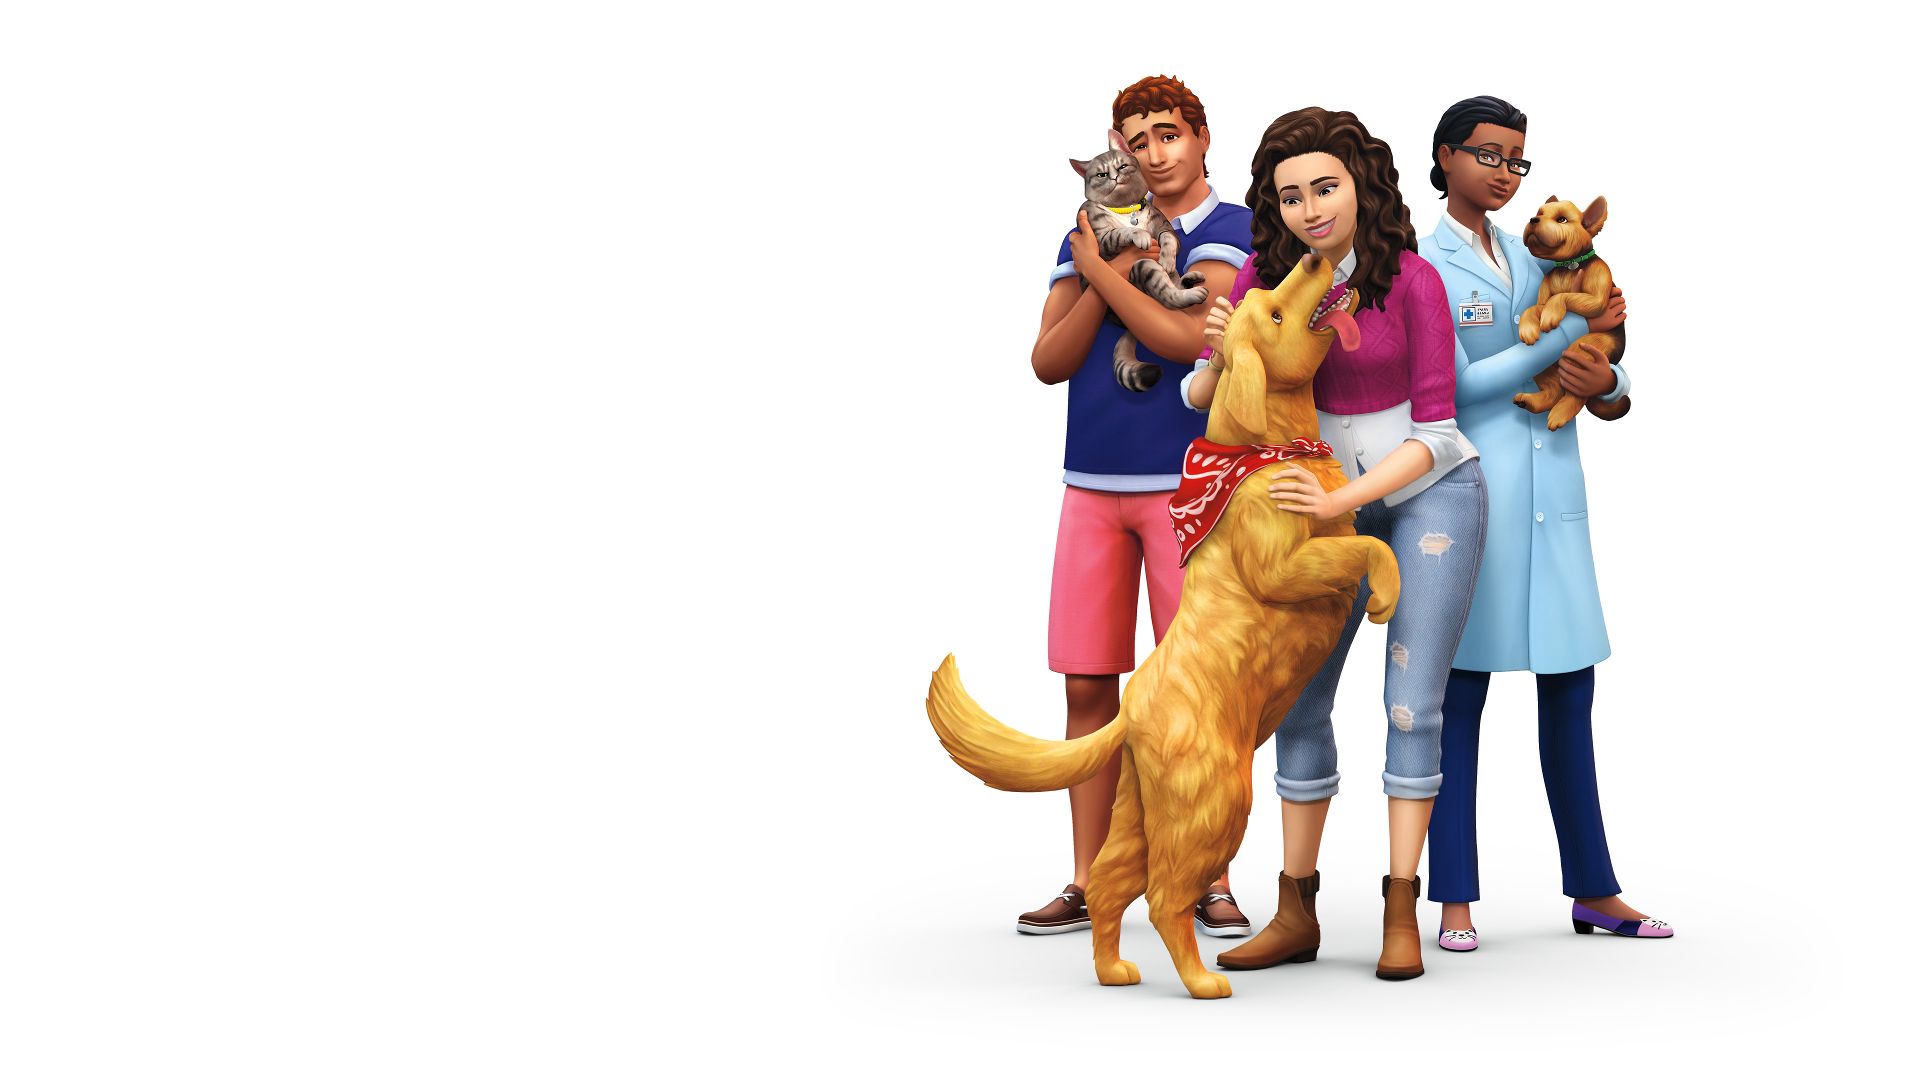 the sims 4 cats and dogs free download pc